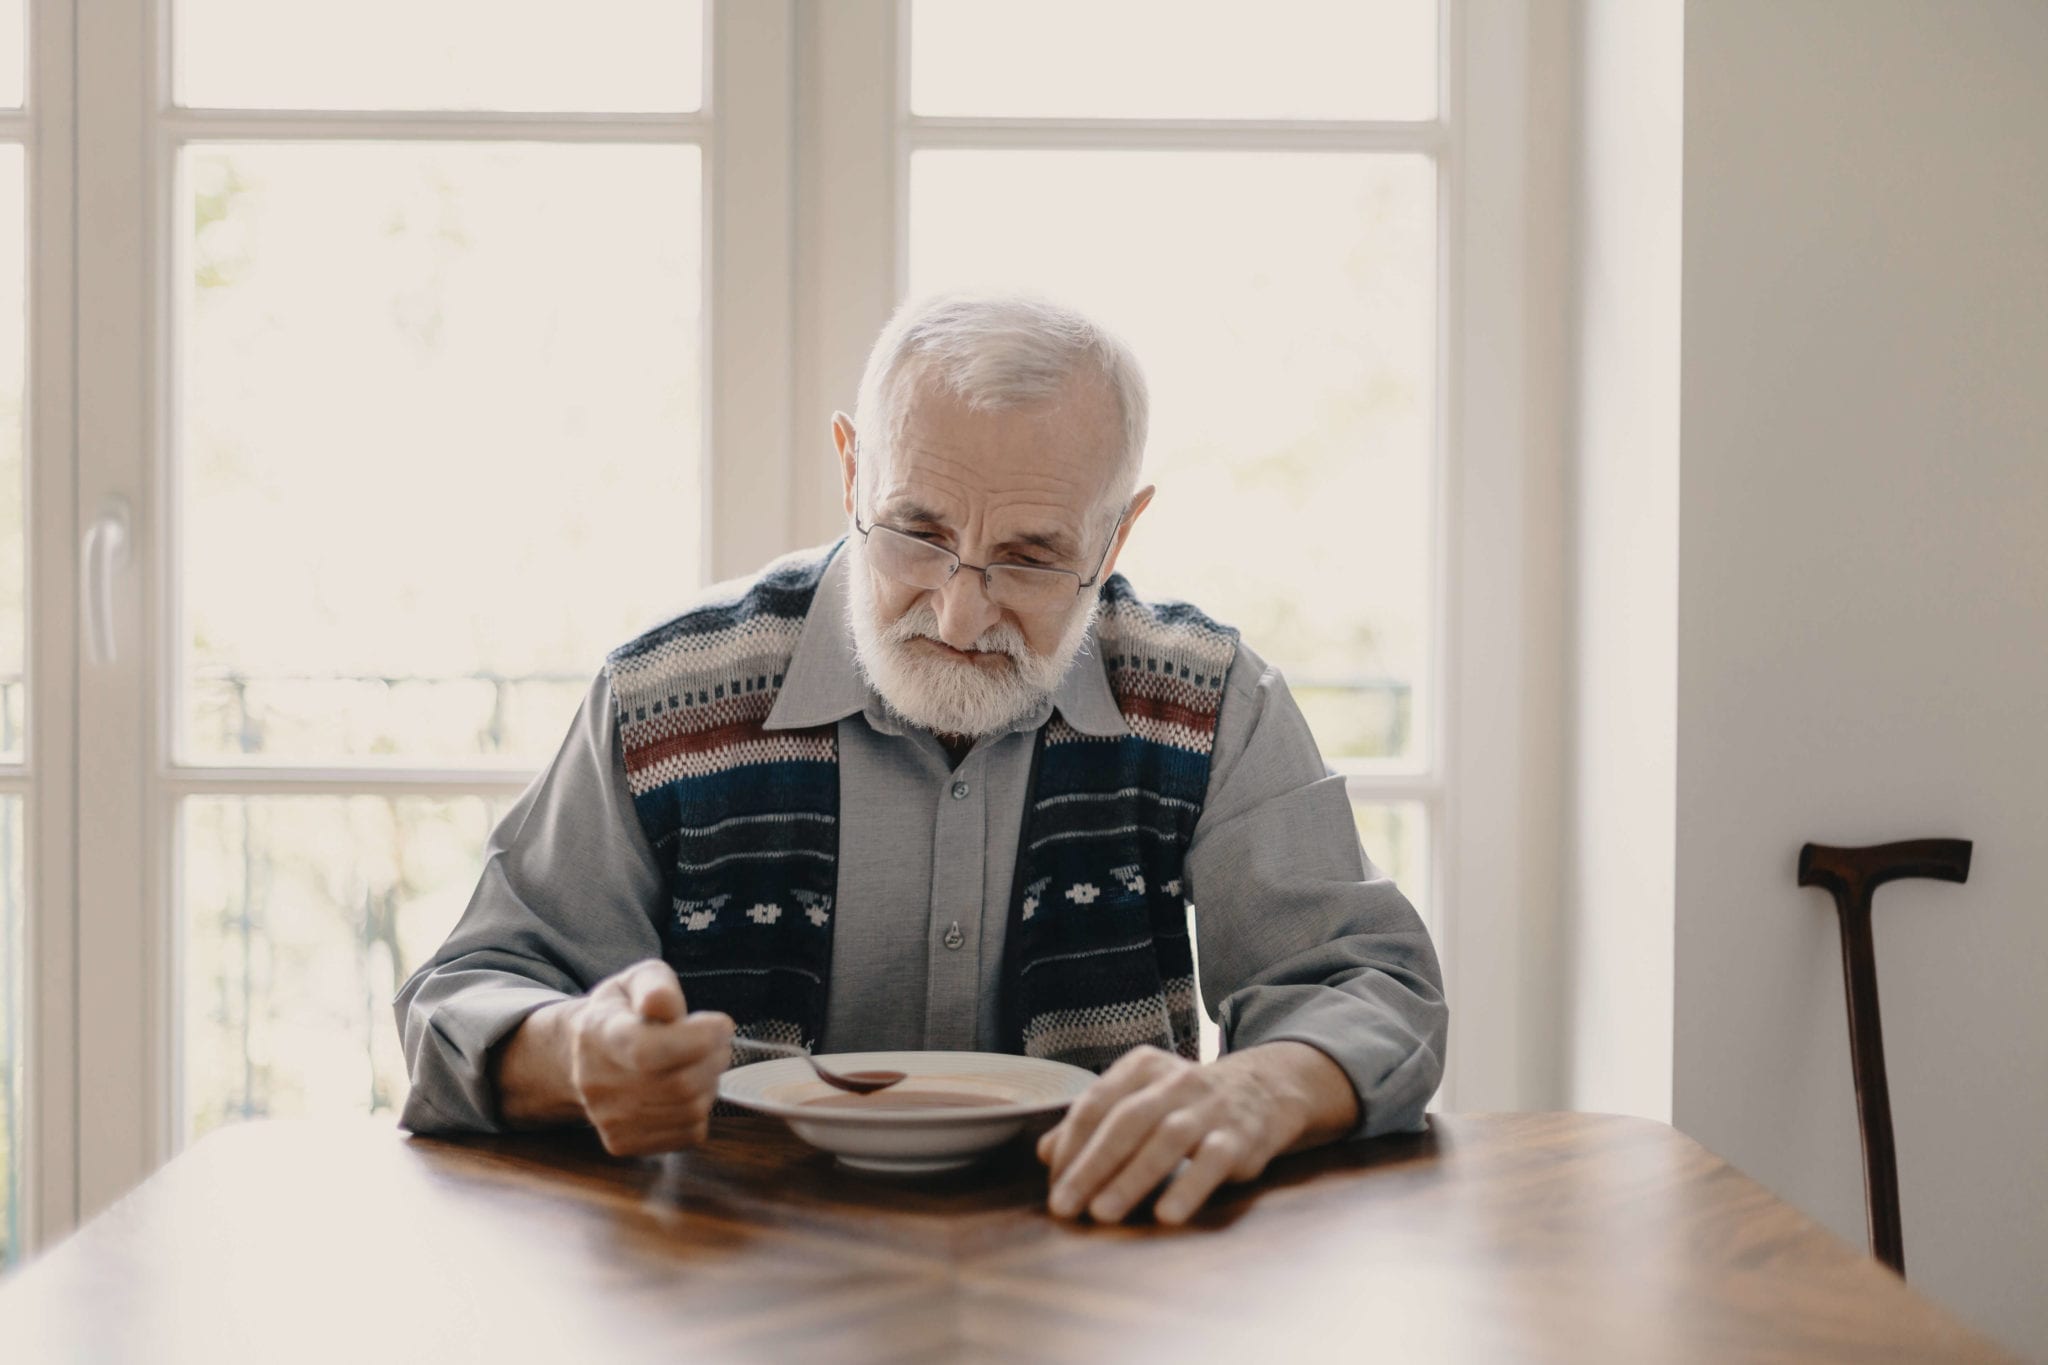 An old man eats soup at a table.